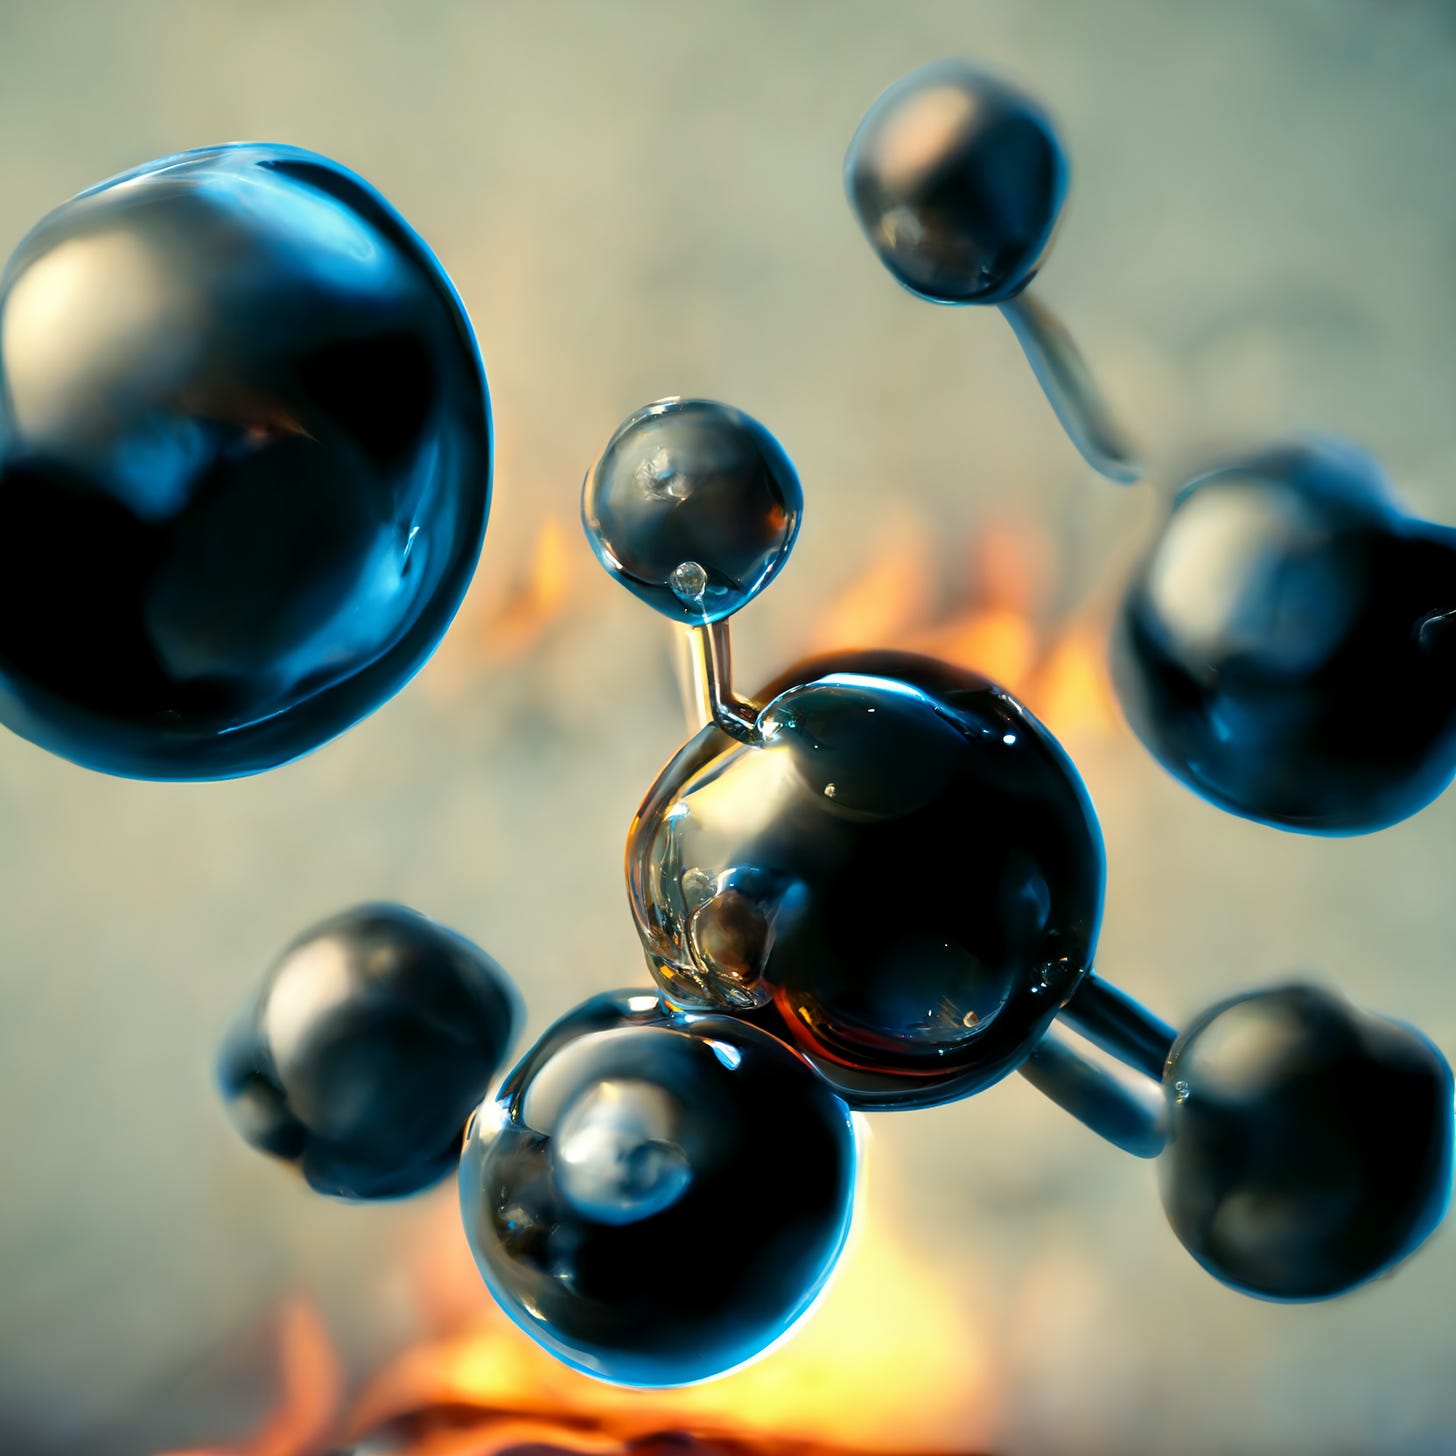 Hydrogen energy chemistry mock-up picture